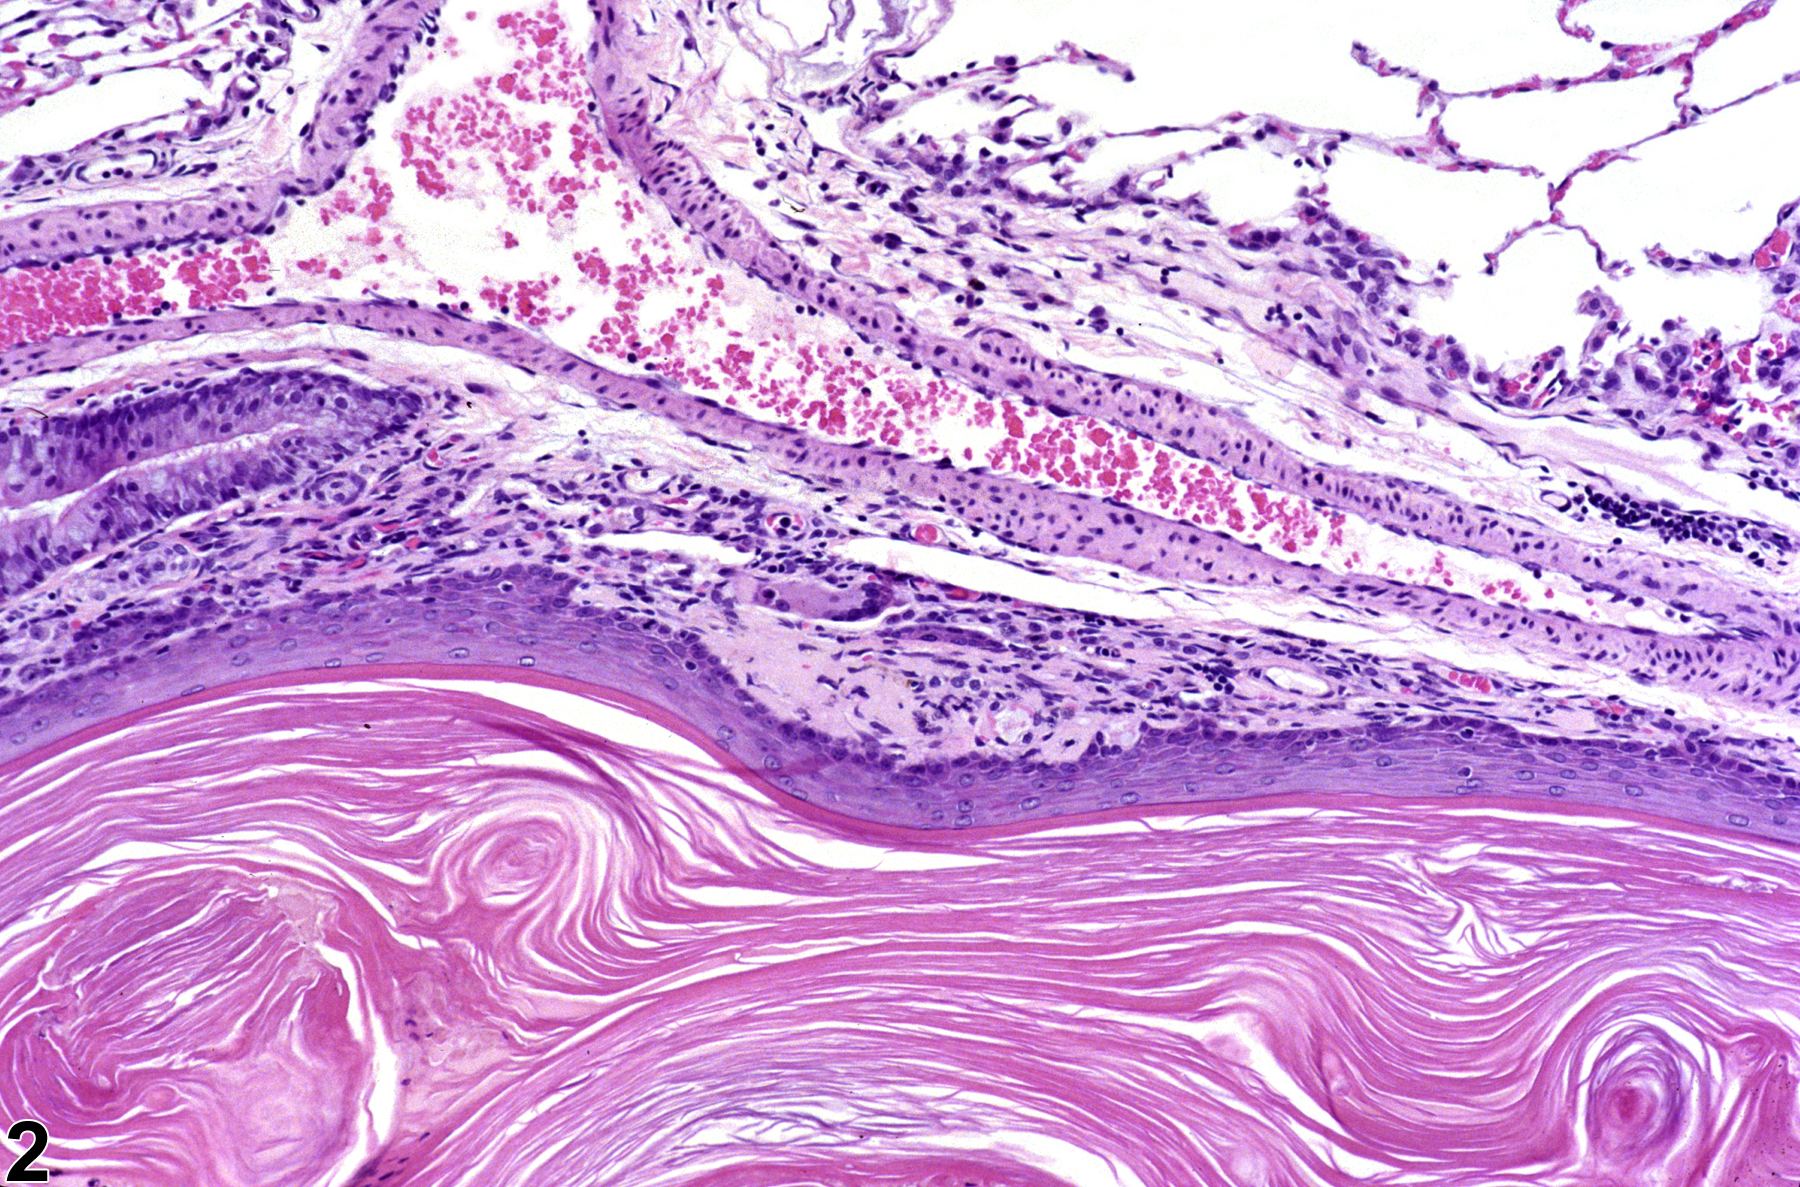 Image of keratinizing cyst in the lung from a male F344/N rat in a chronic study